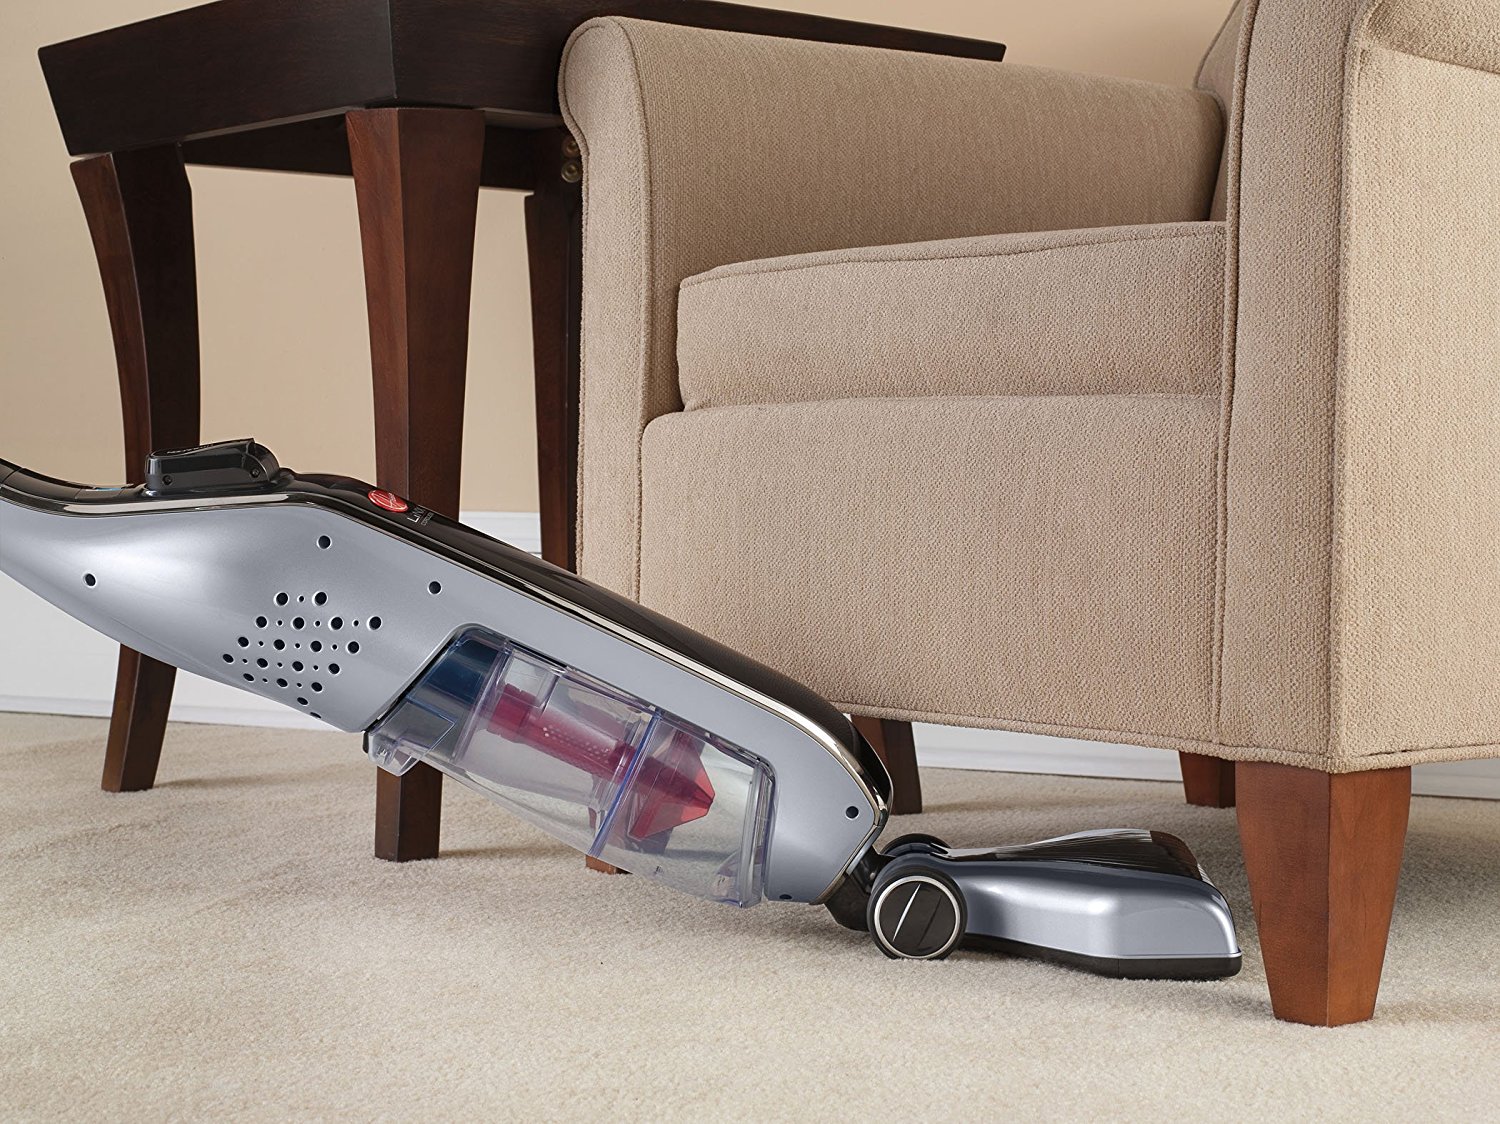 Hoover Linx Cordless Stick Vacuum Cleaner Lightweight BH50010 Grey Charge